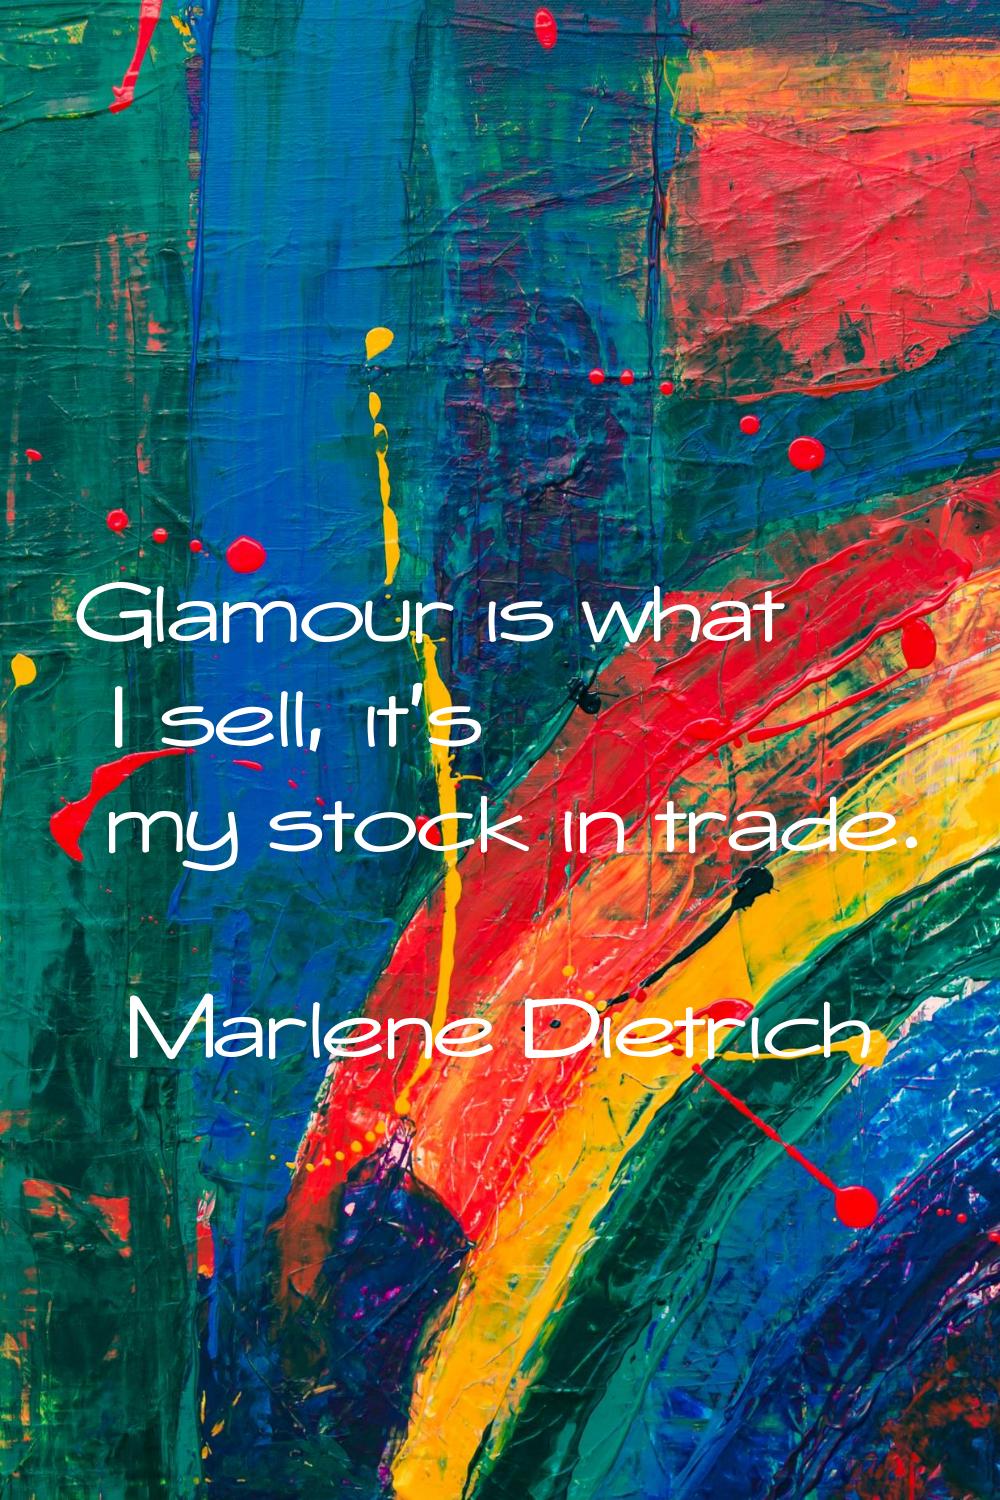 Glamour is what I sell, it's my stock in trade.